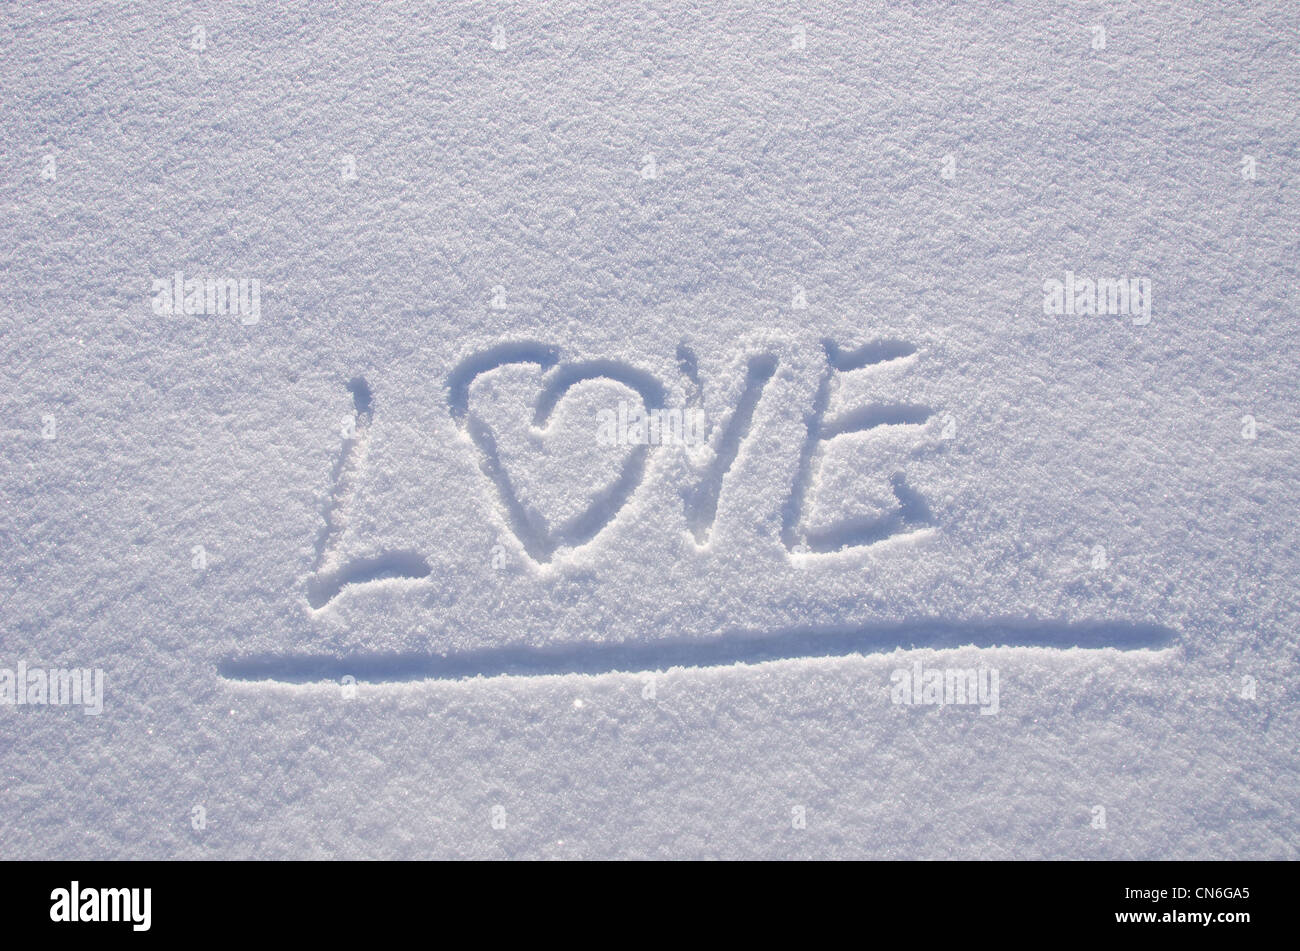 Inscription love on snow in winter. Concept expression of human feelings. Stock Photo